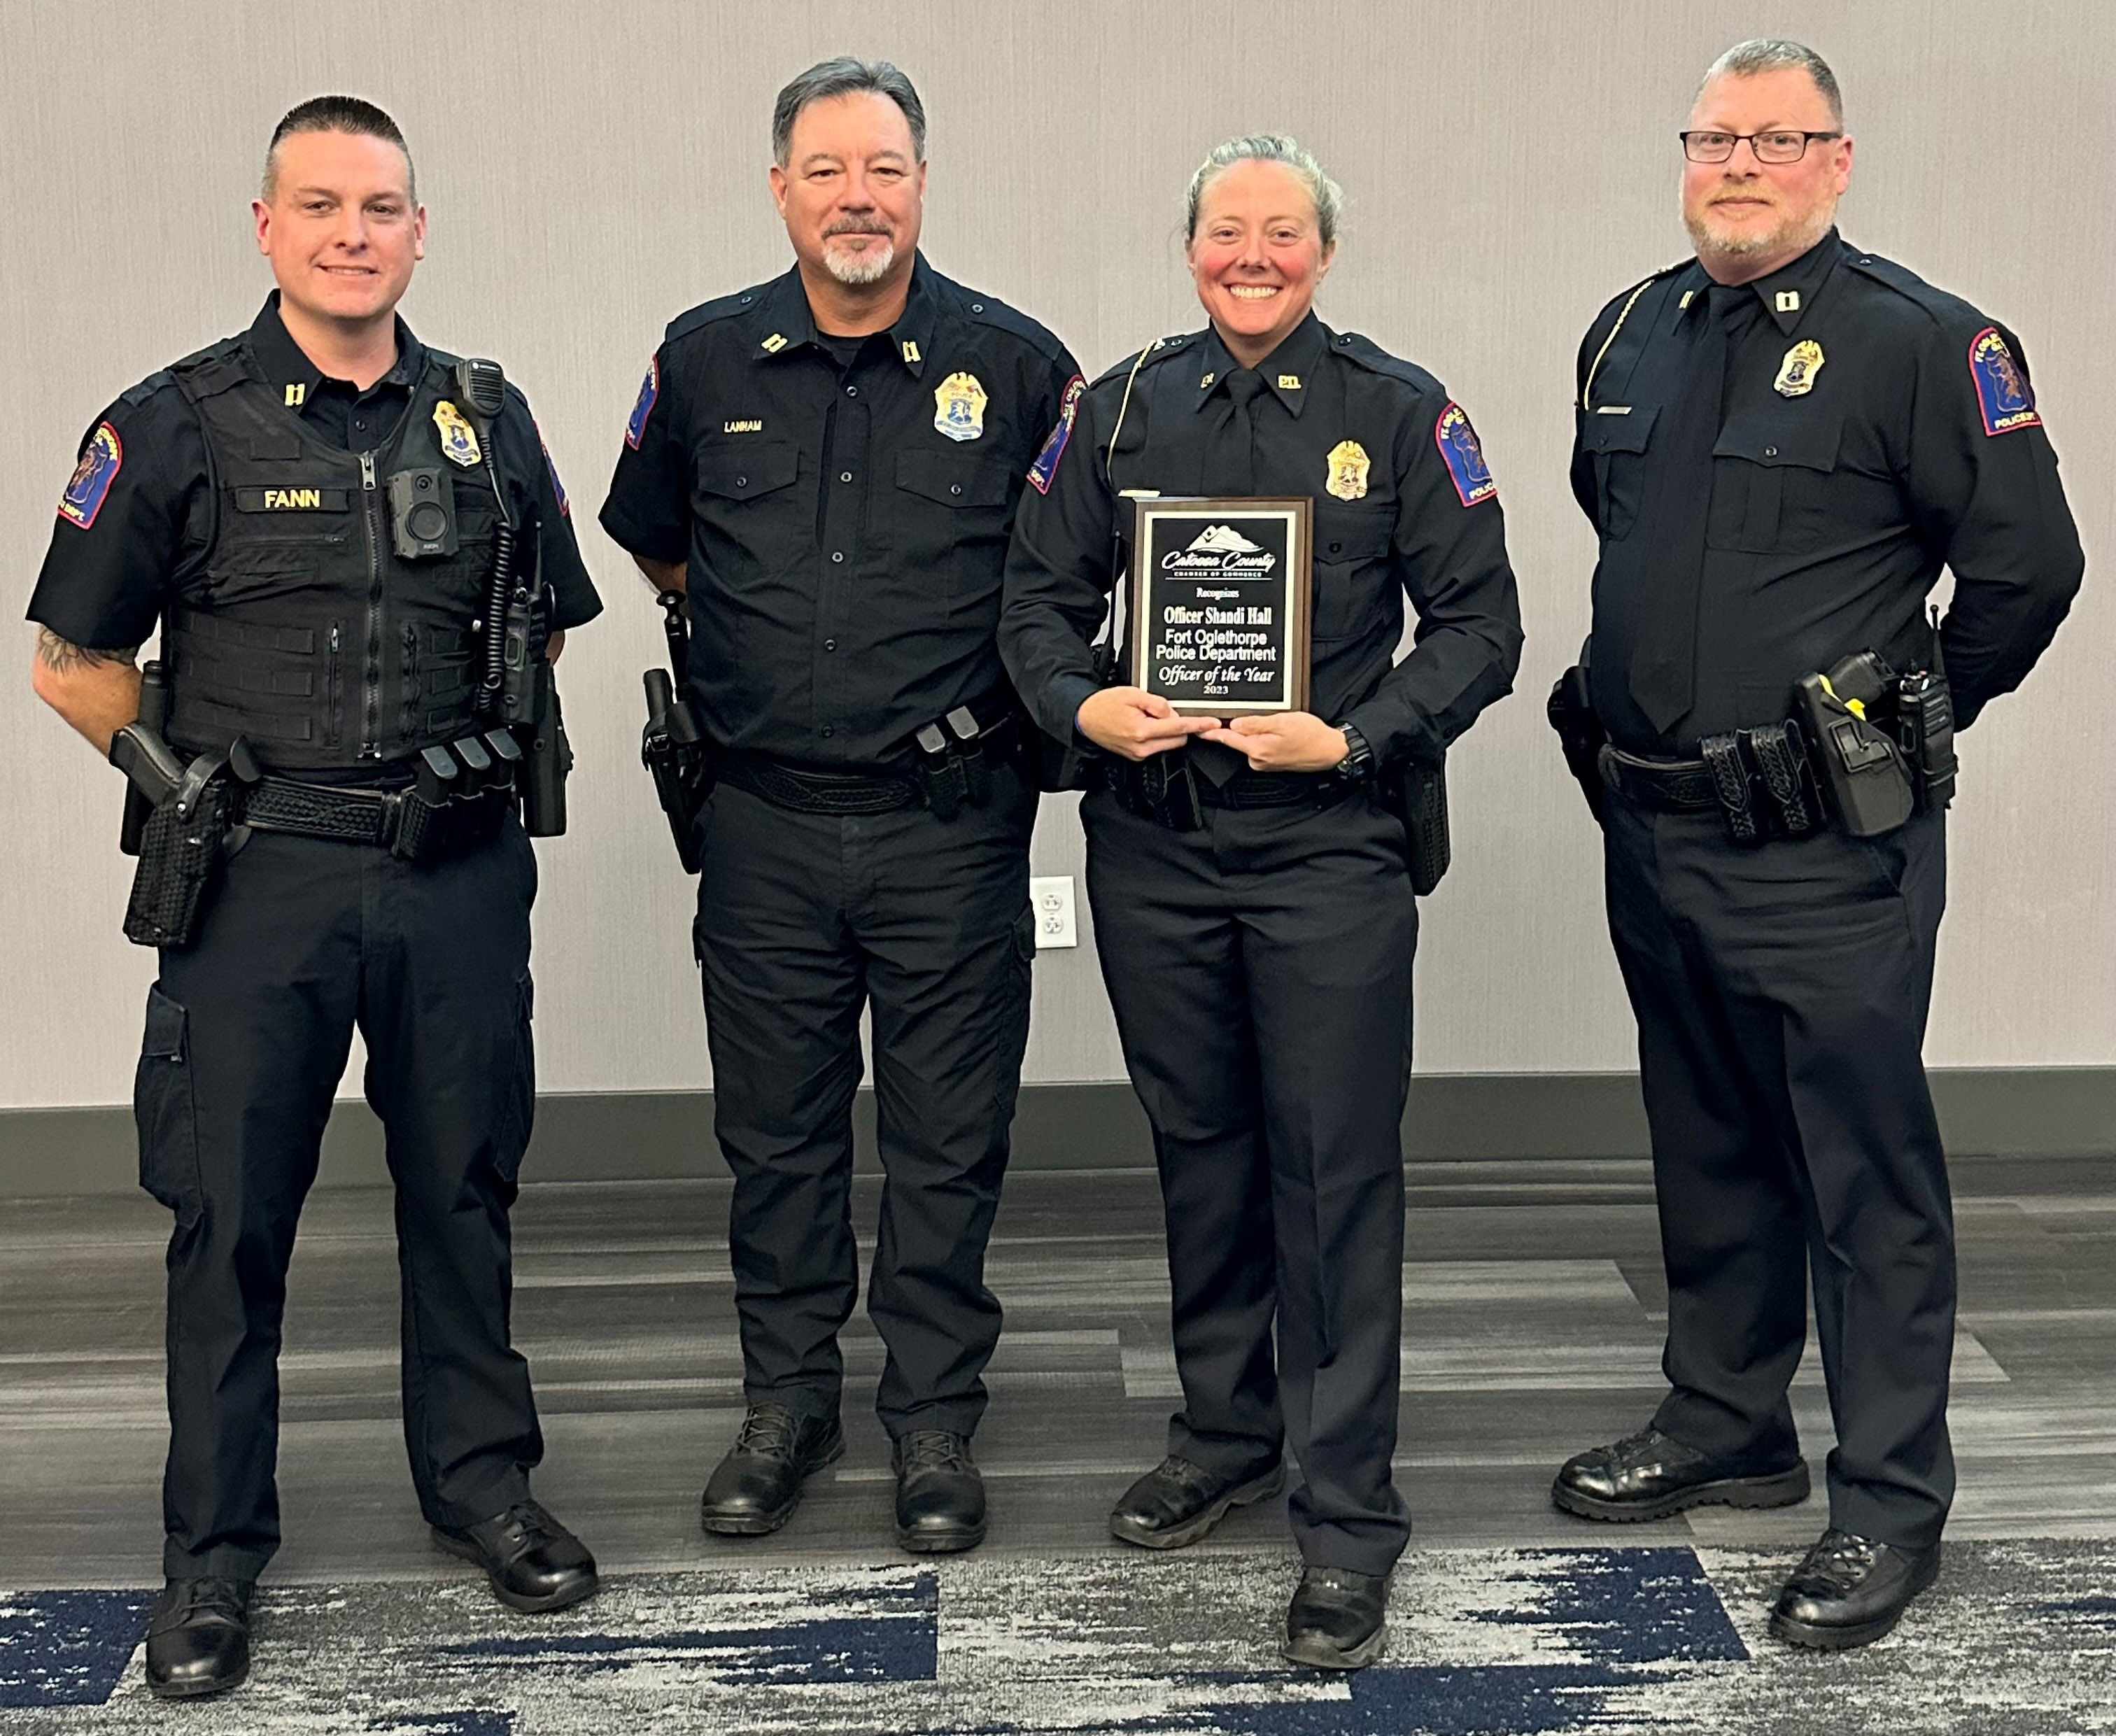 The Catoosa County Chamber of Commerce named Shandi Hall (second from right) as its Officer of the Year for 2023. (from left) Fort Oglethorpe Police Capts. Shane Fann, John Lanham and Brian Stooksbury present Hall with the award.